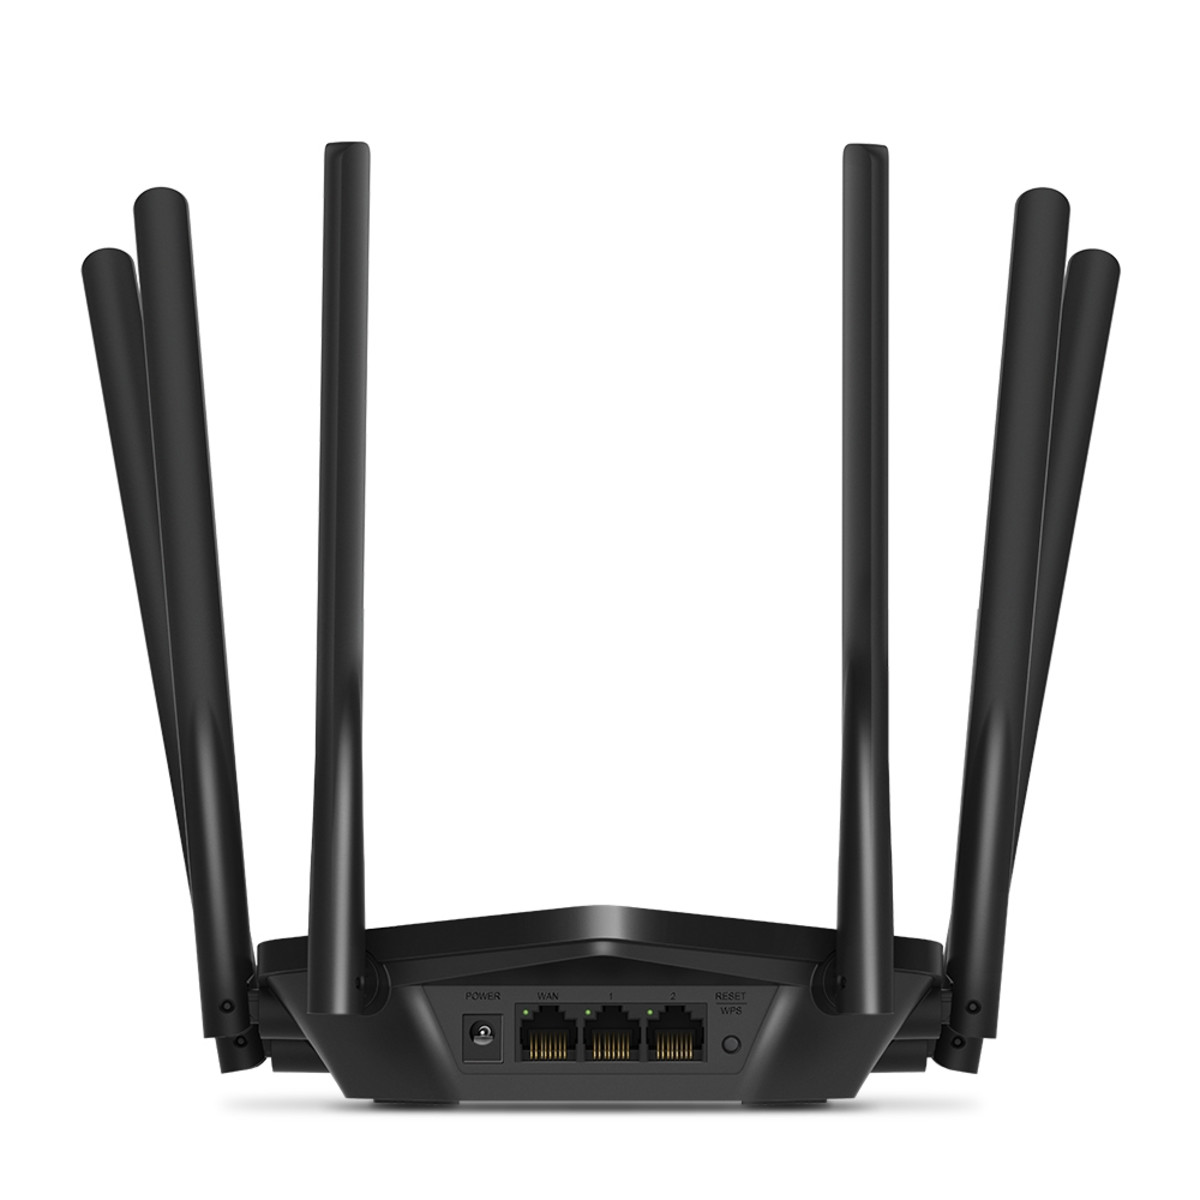 AC1900 Wireless Dual Band Gigabit Router